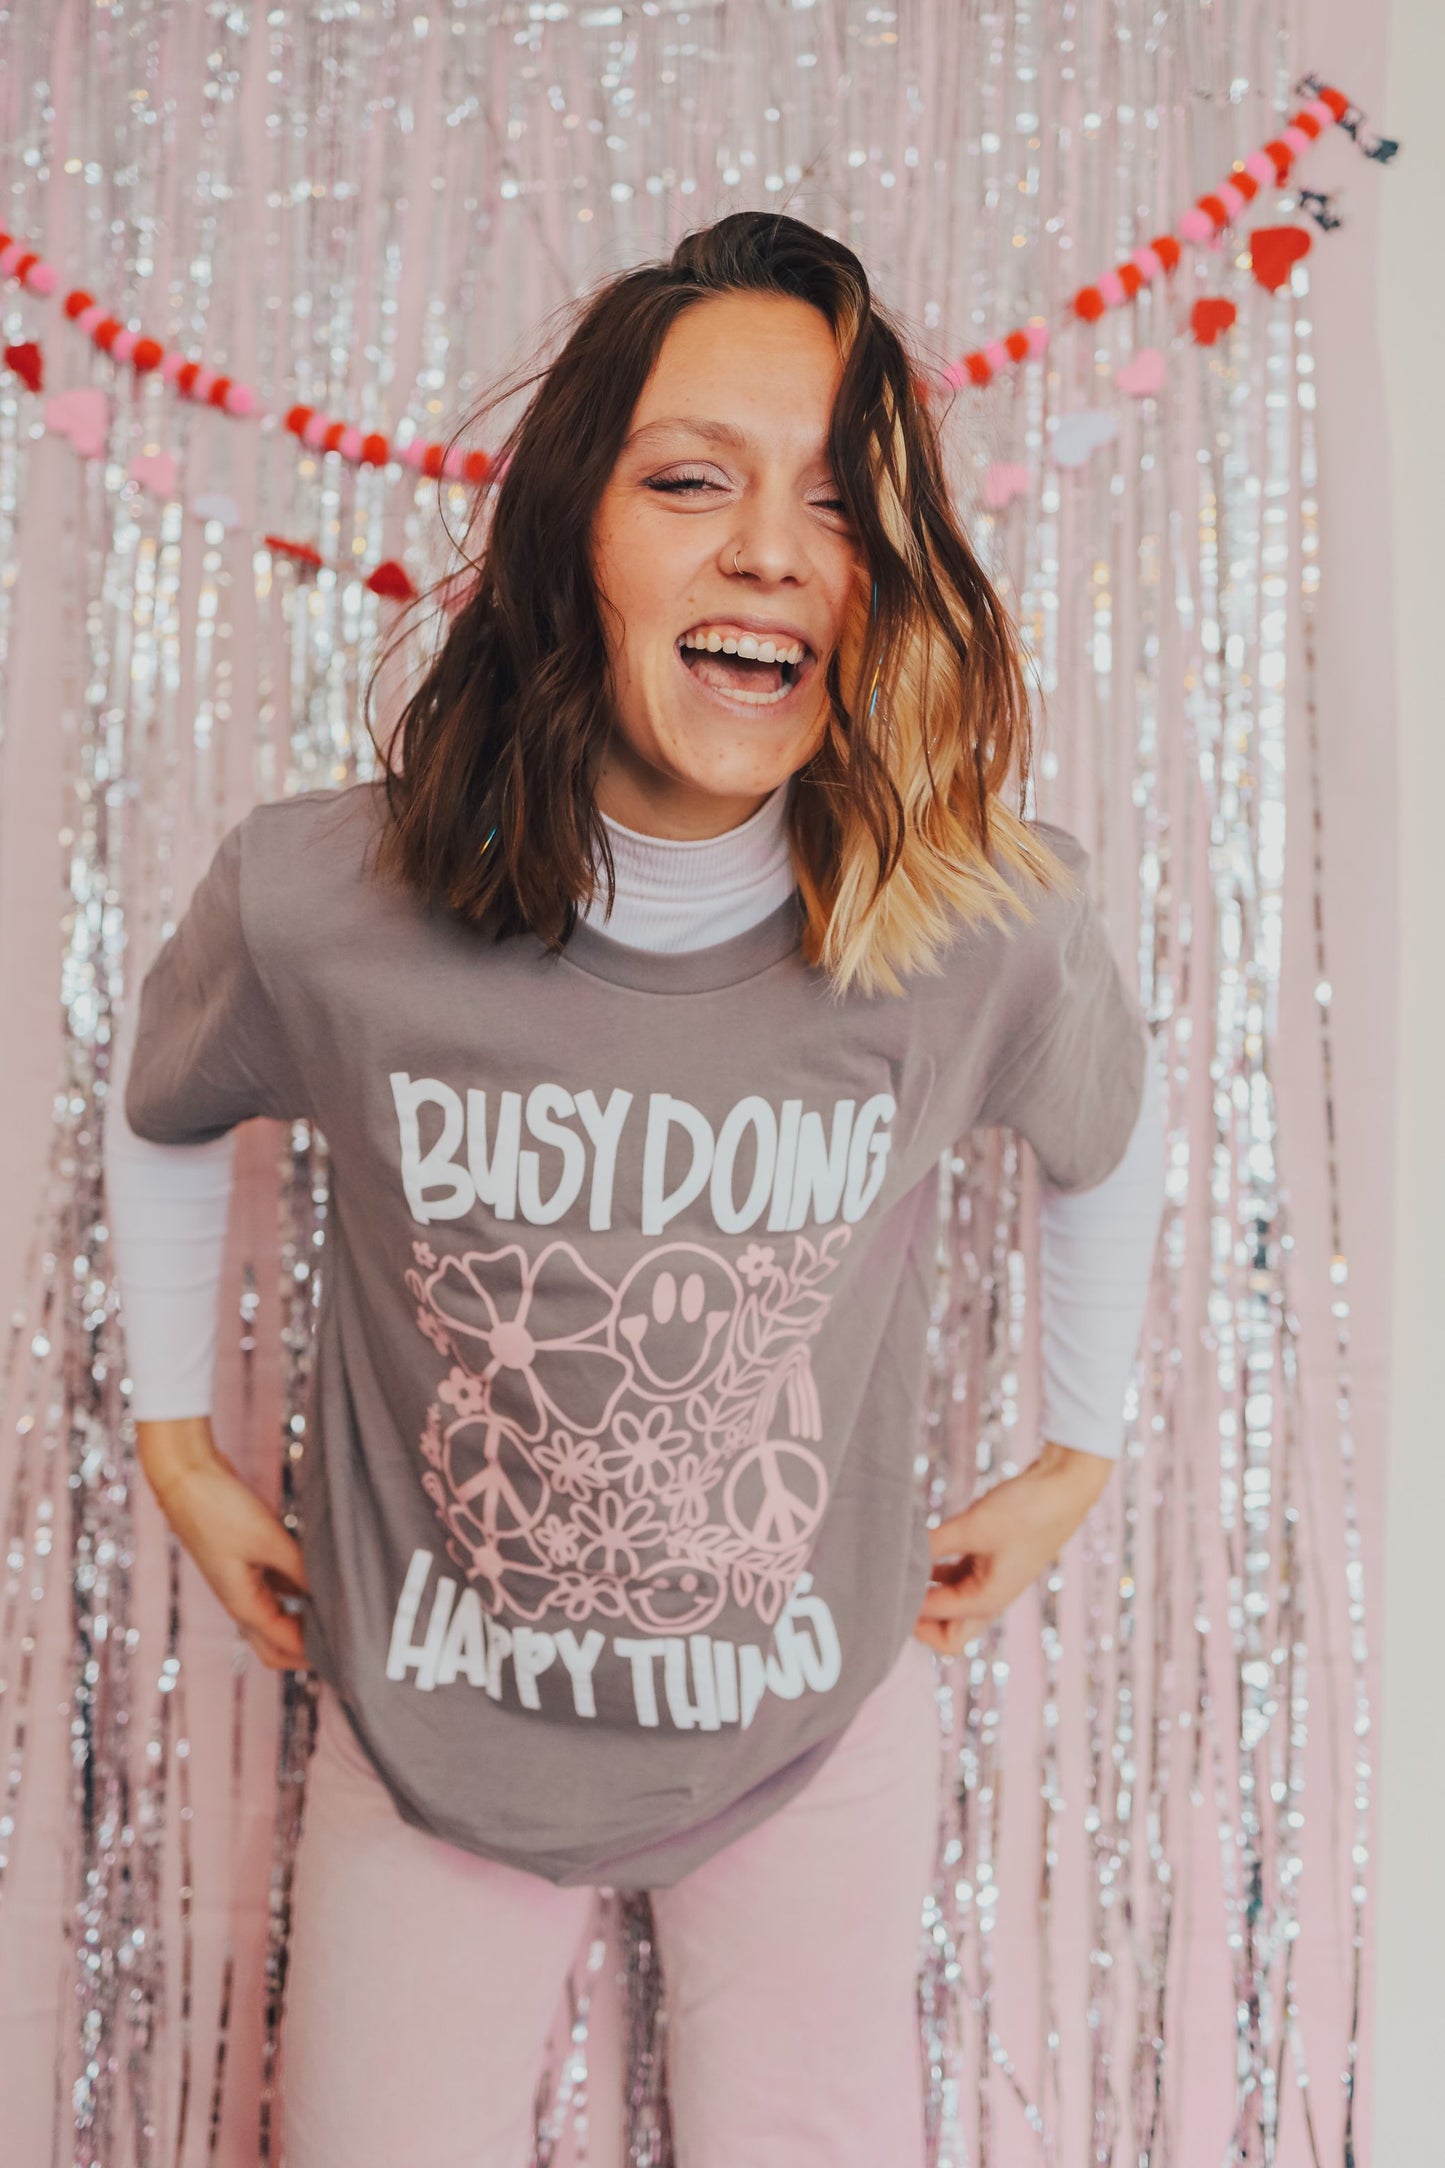 Busy Doing Happy Things Tee